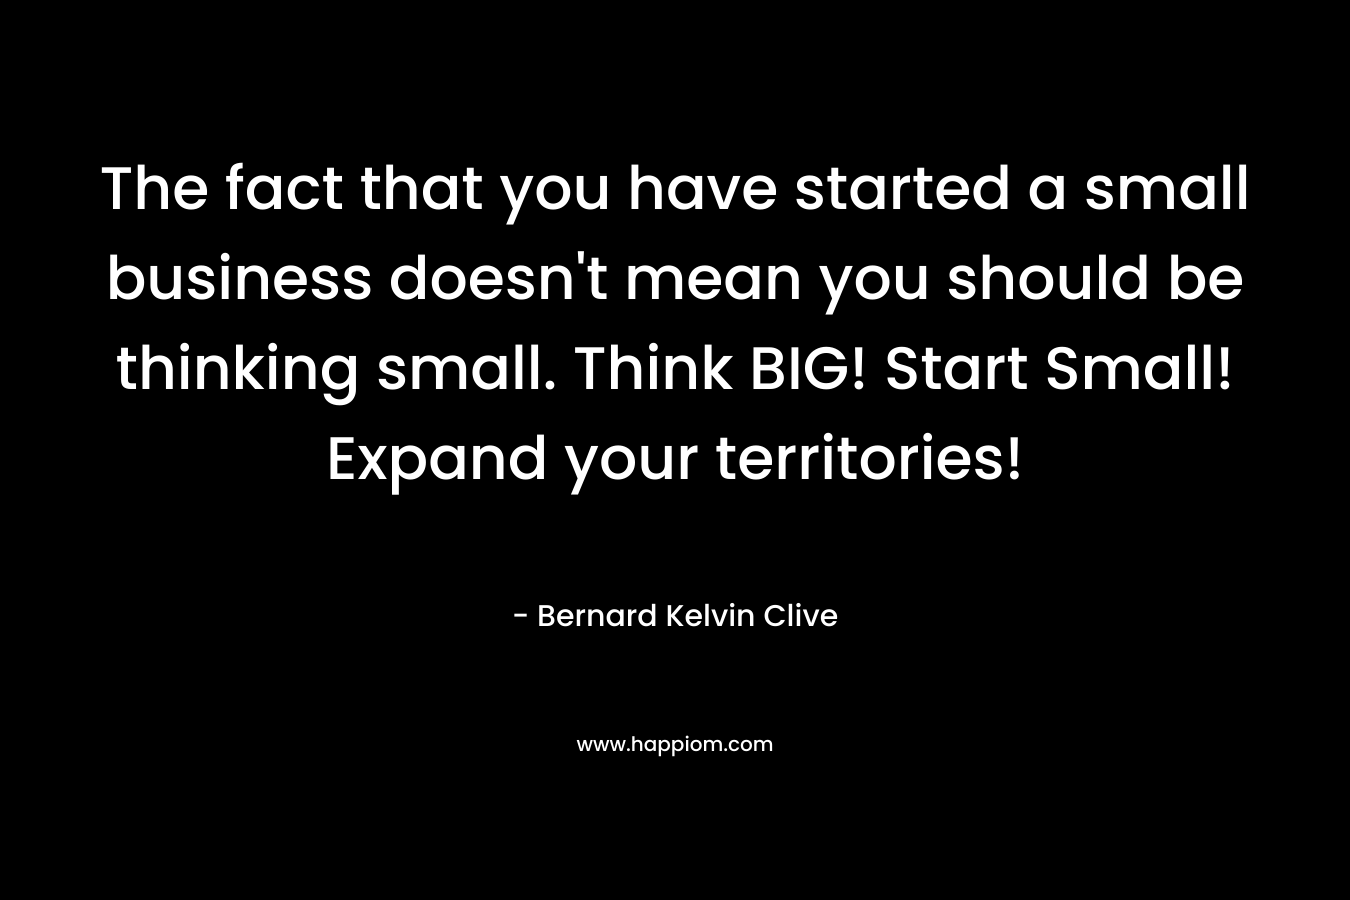 The fact that you have started a small business doesn't mean you should be thinking small. Think BIG! Start Small! Expand your territories!